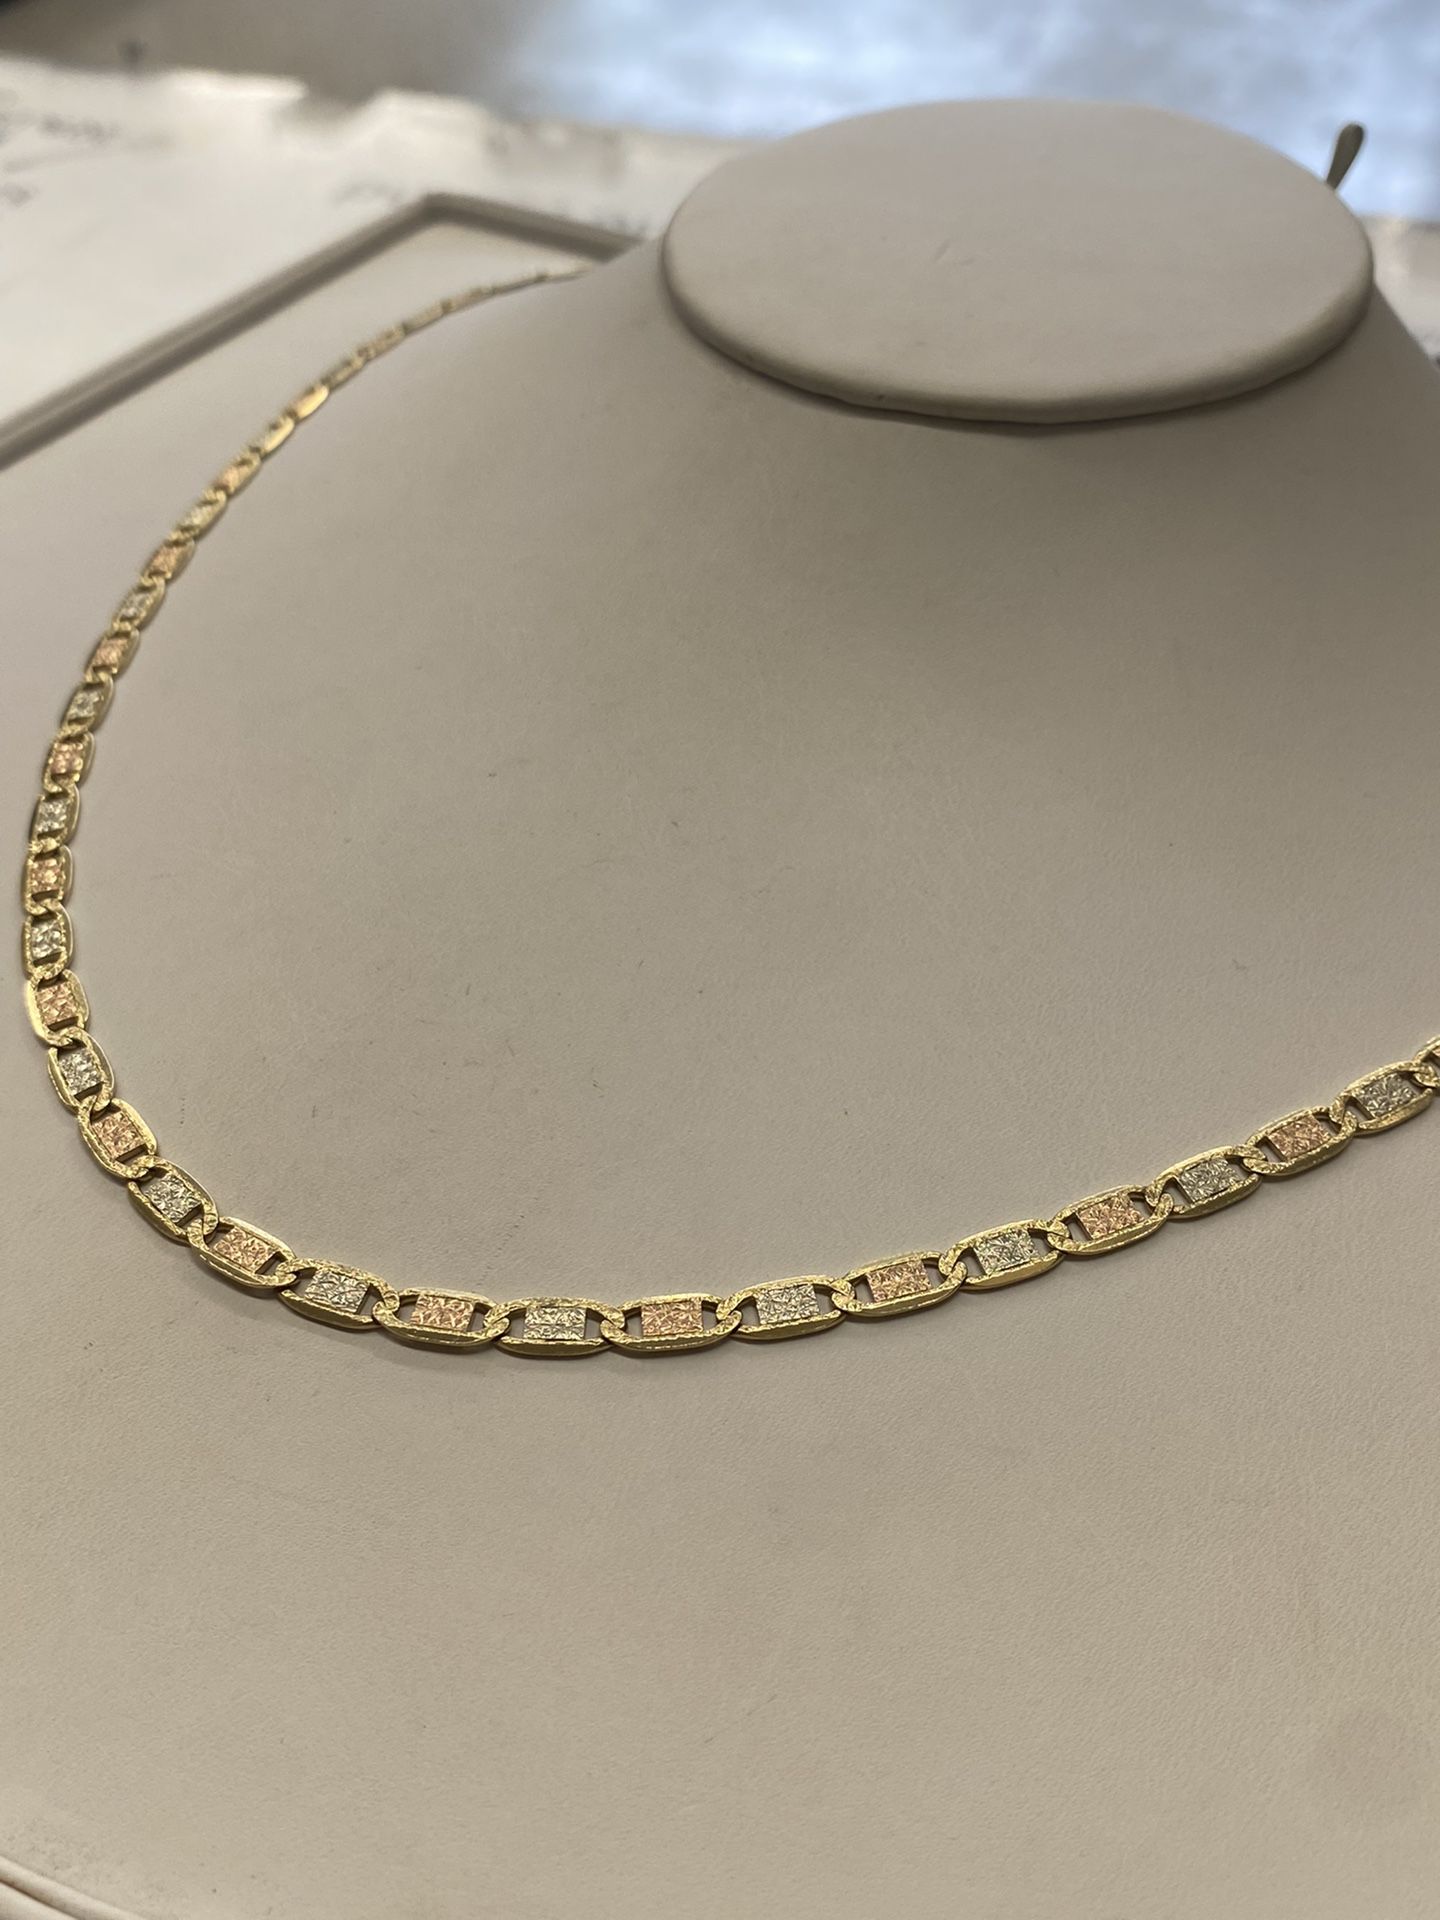 14k Gucci Link Gold Chain 